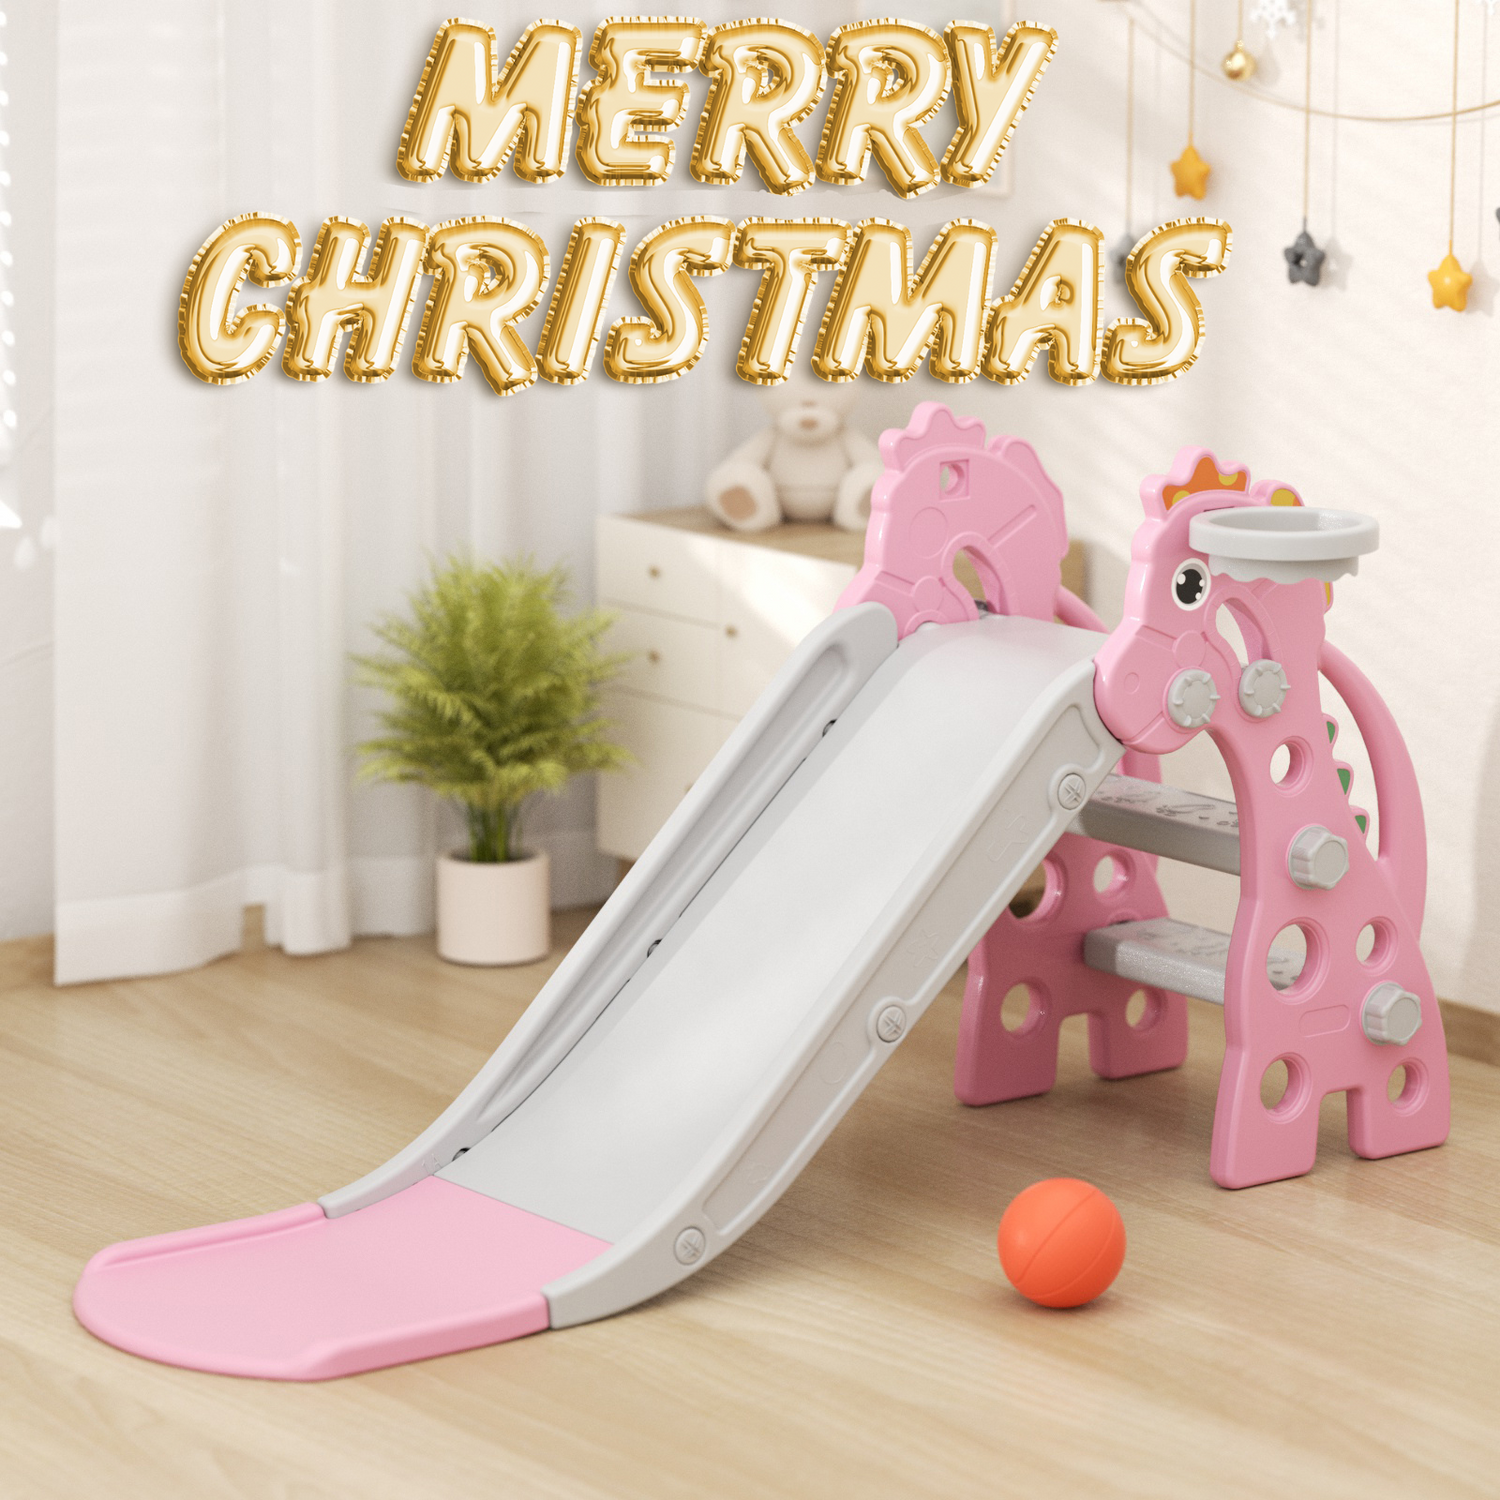 Joy Unboxed: Why Now is the Perfect Time to Gift Your Baby with our Playful Wonderland – Christmas Edition!